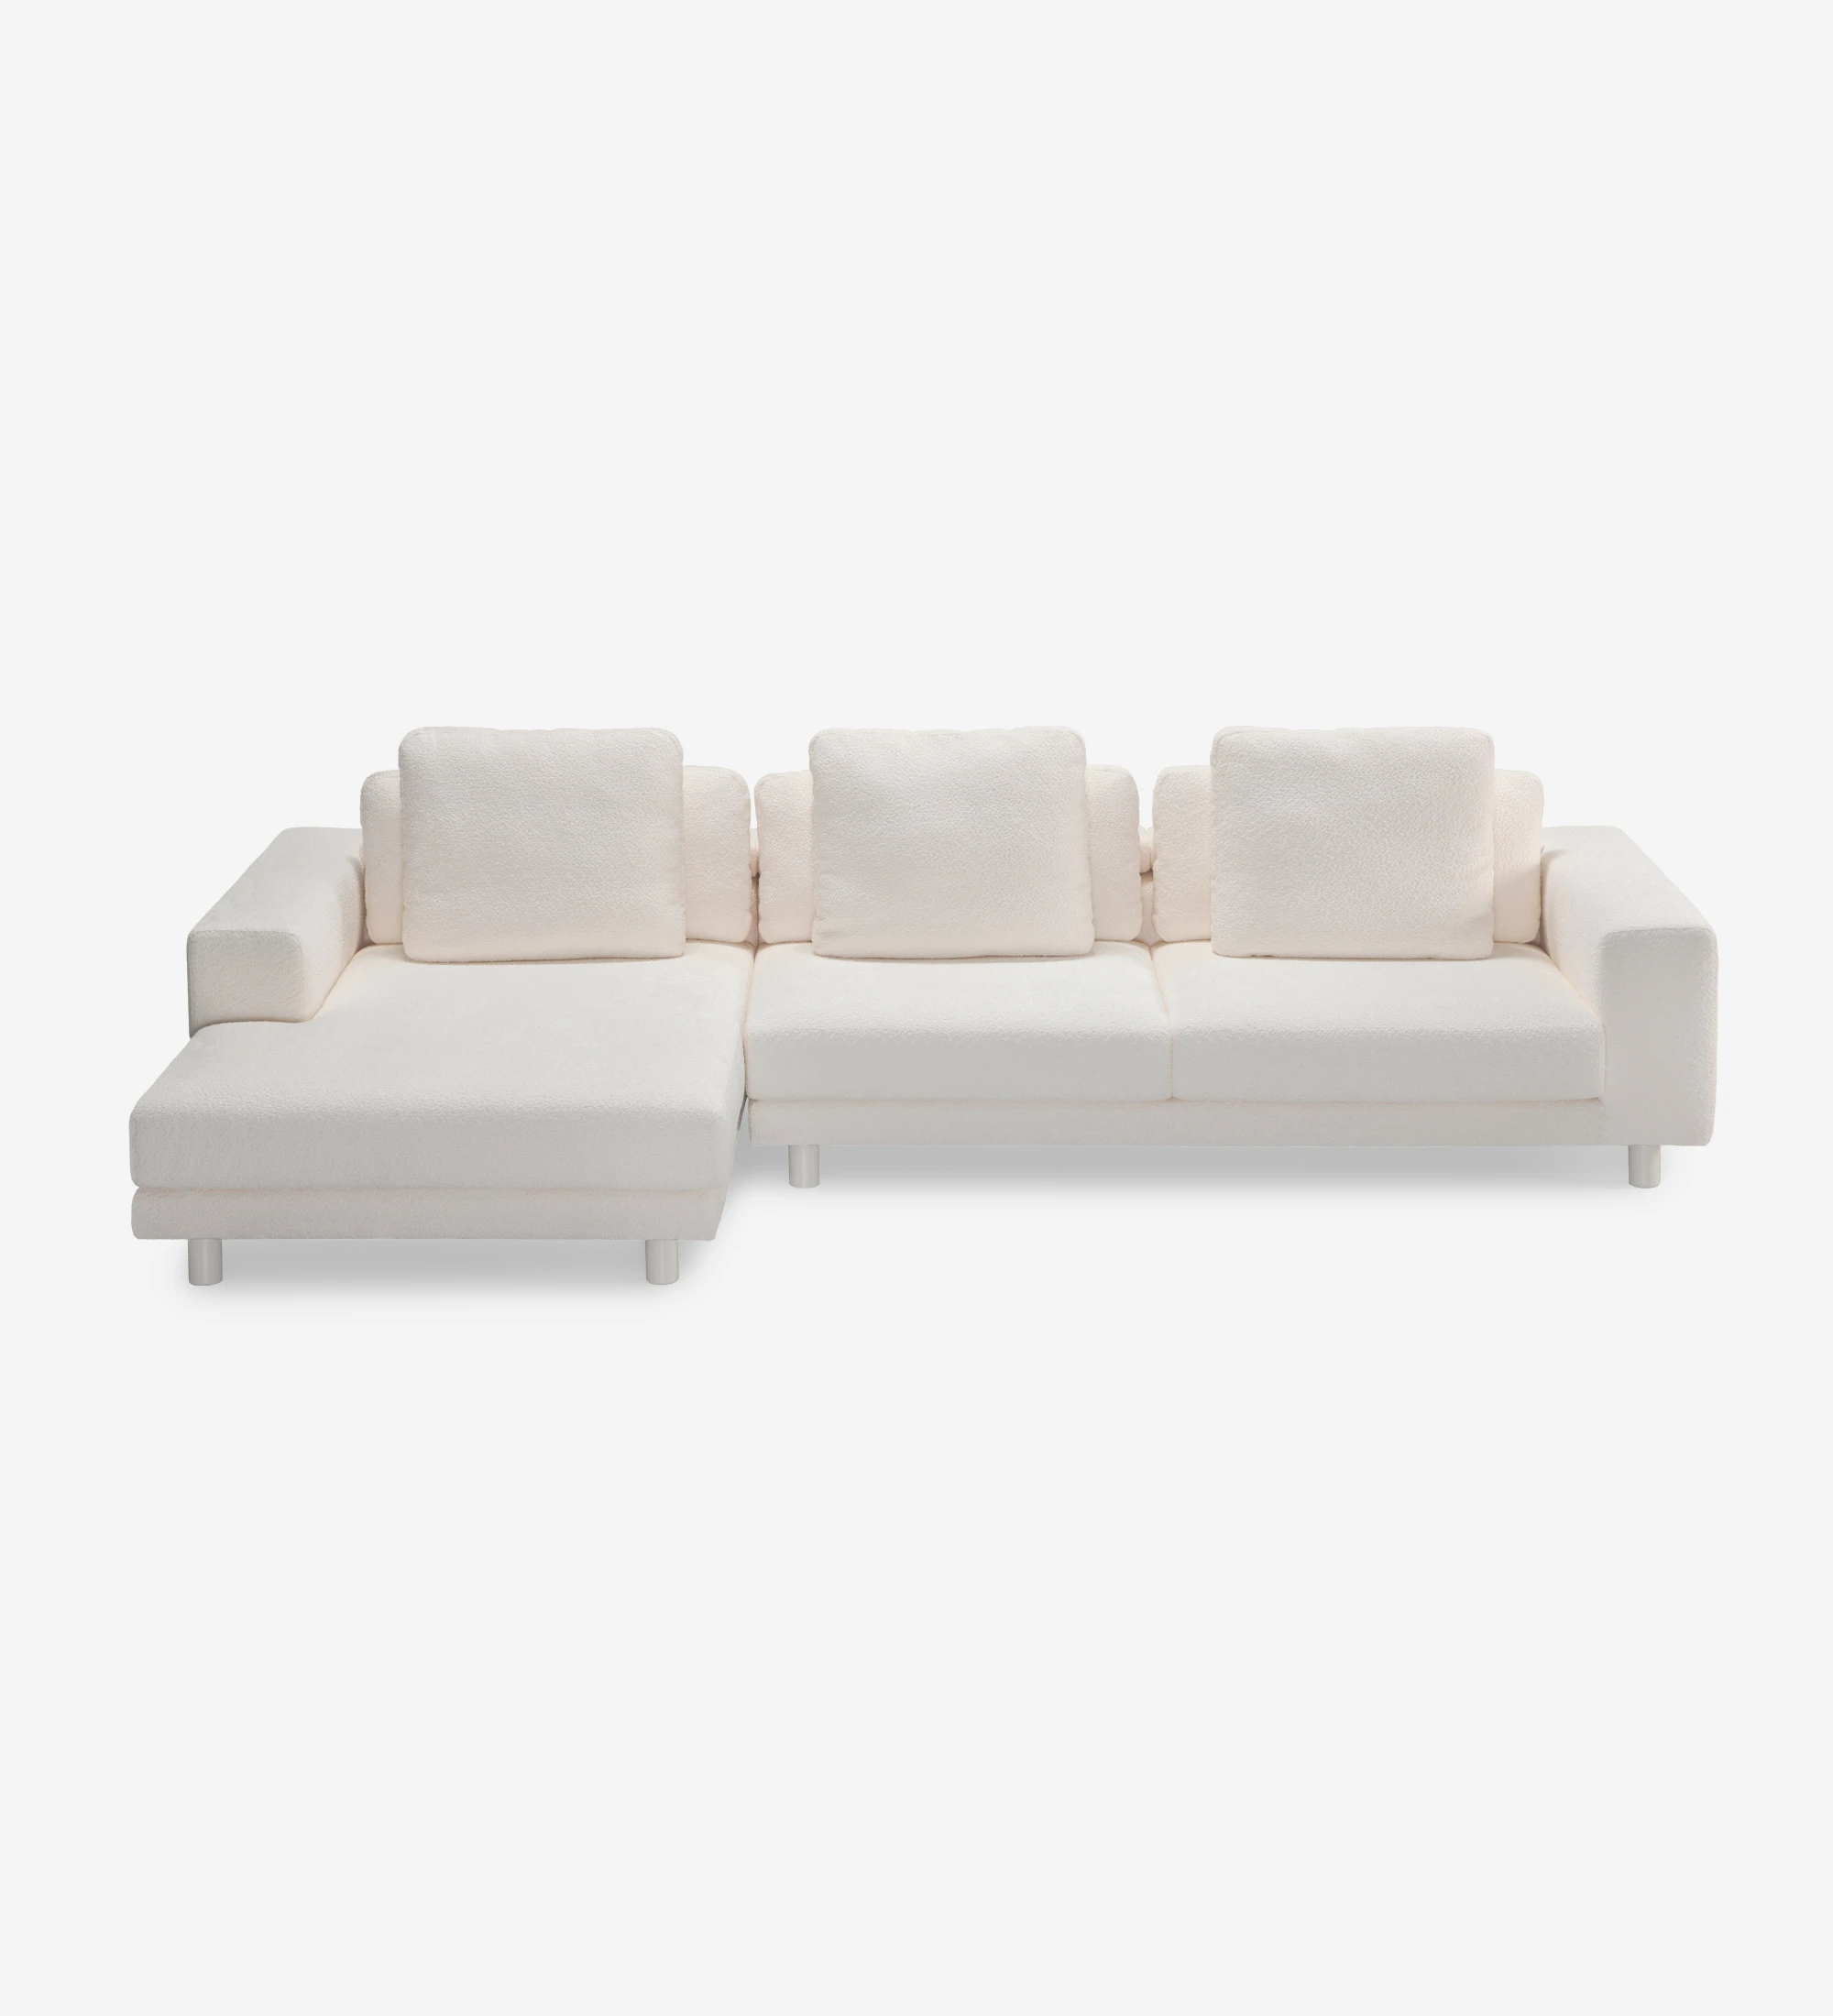 Dallas 3-seater sofa and left chaise longue, upholstered in beige fabric, folding back cushions, pearl lacquered feet, 318 cm.